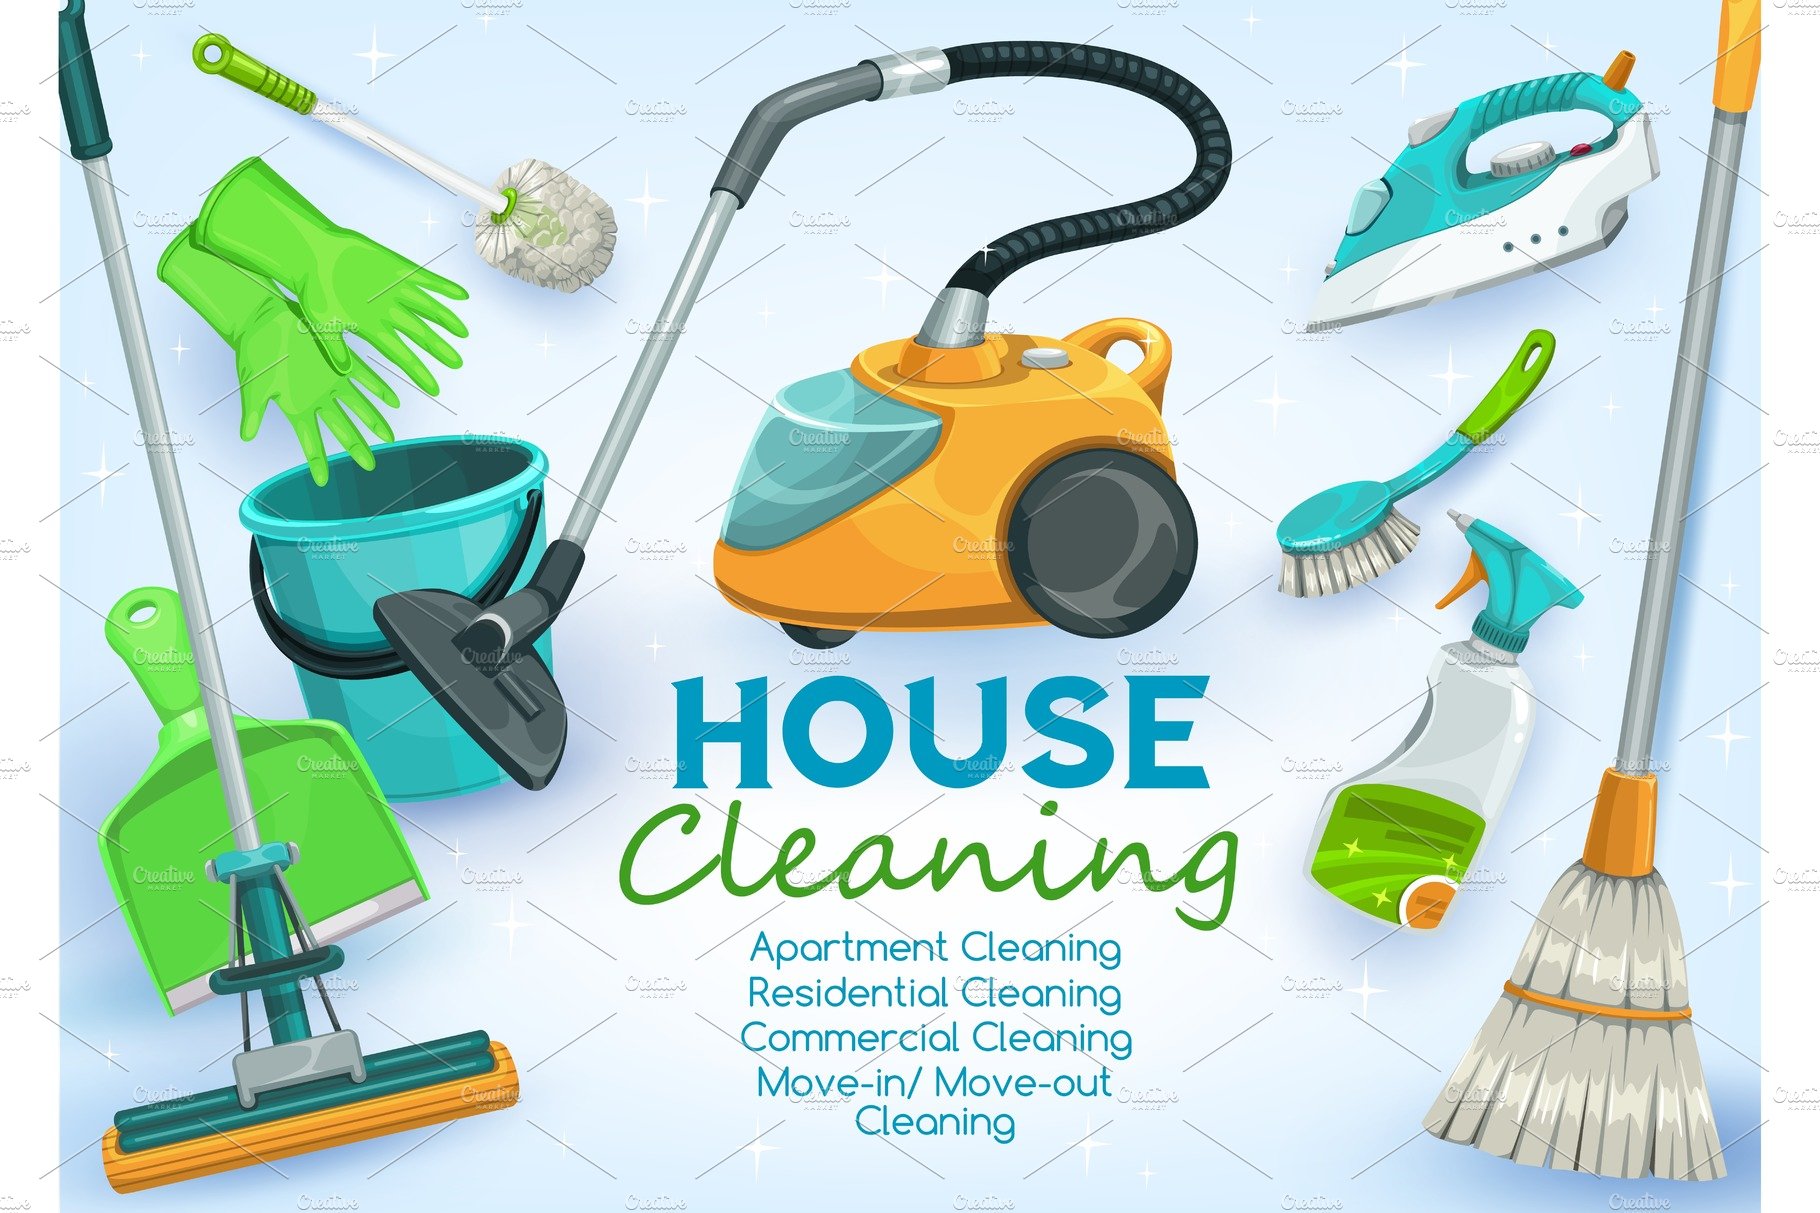 Cleaning service, washing cover image.